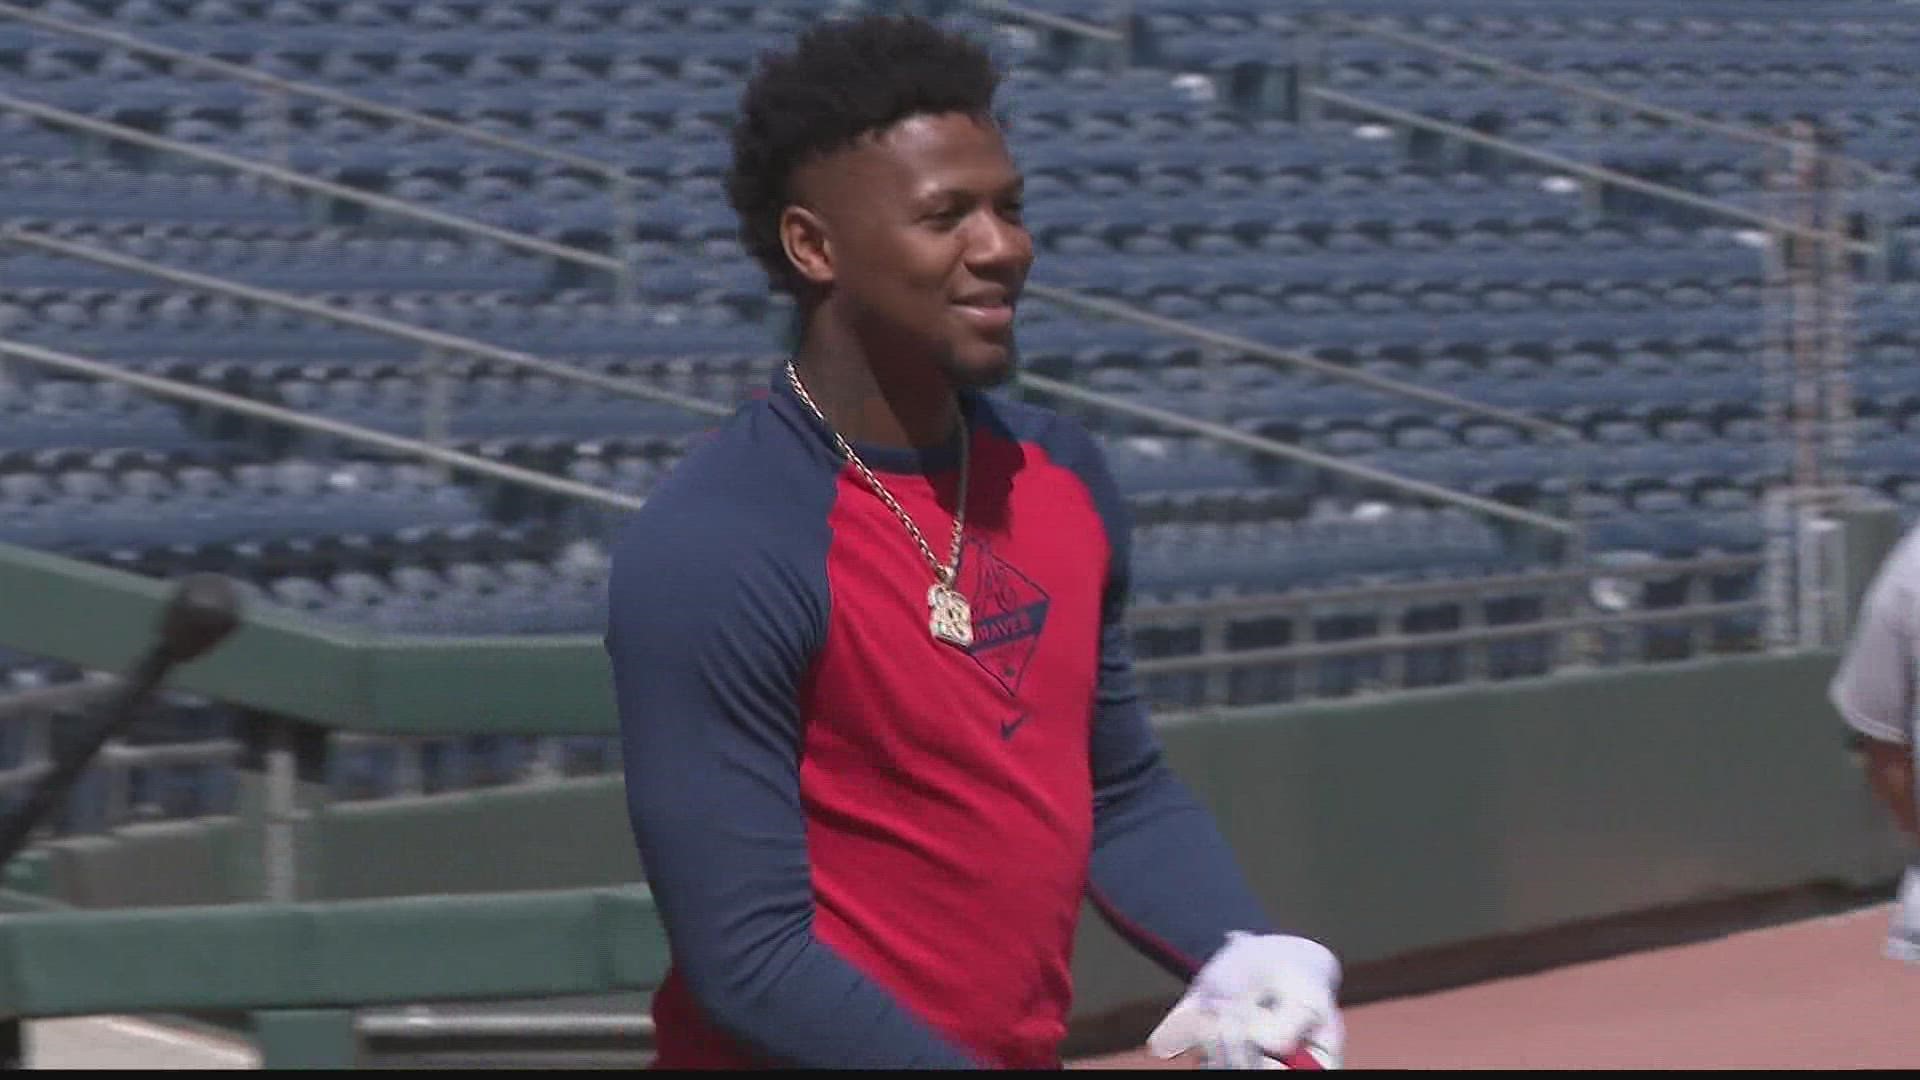 Acuña Jr. is rehabbing with the Gwinnett Stripers until he's cleared to play with his major league team.